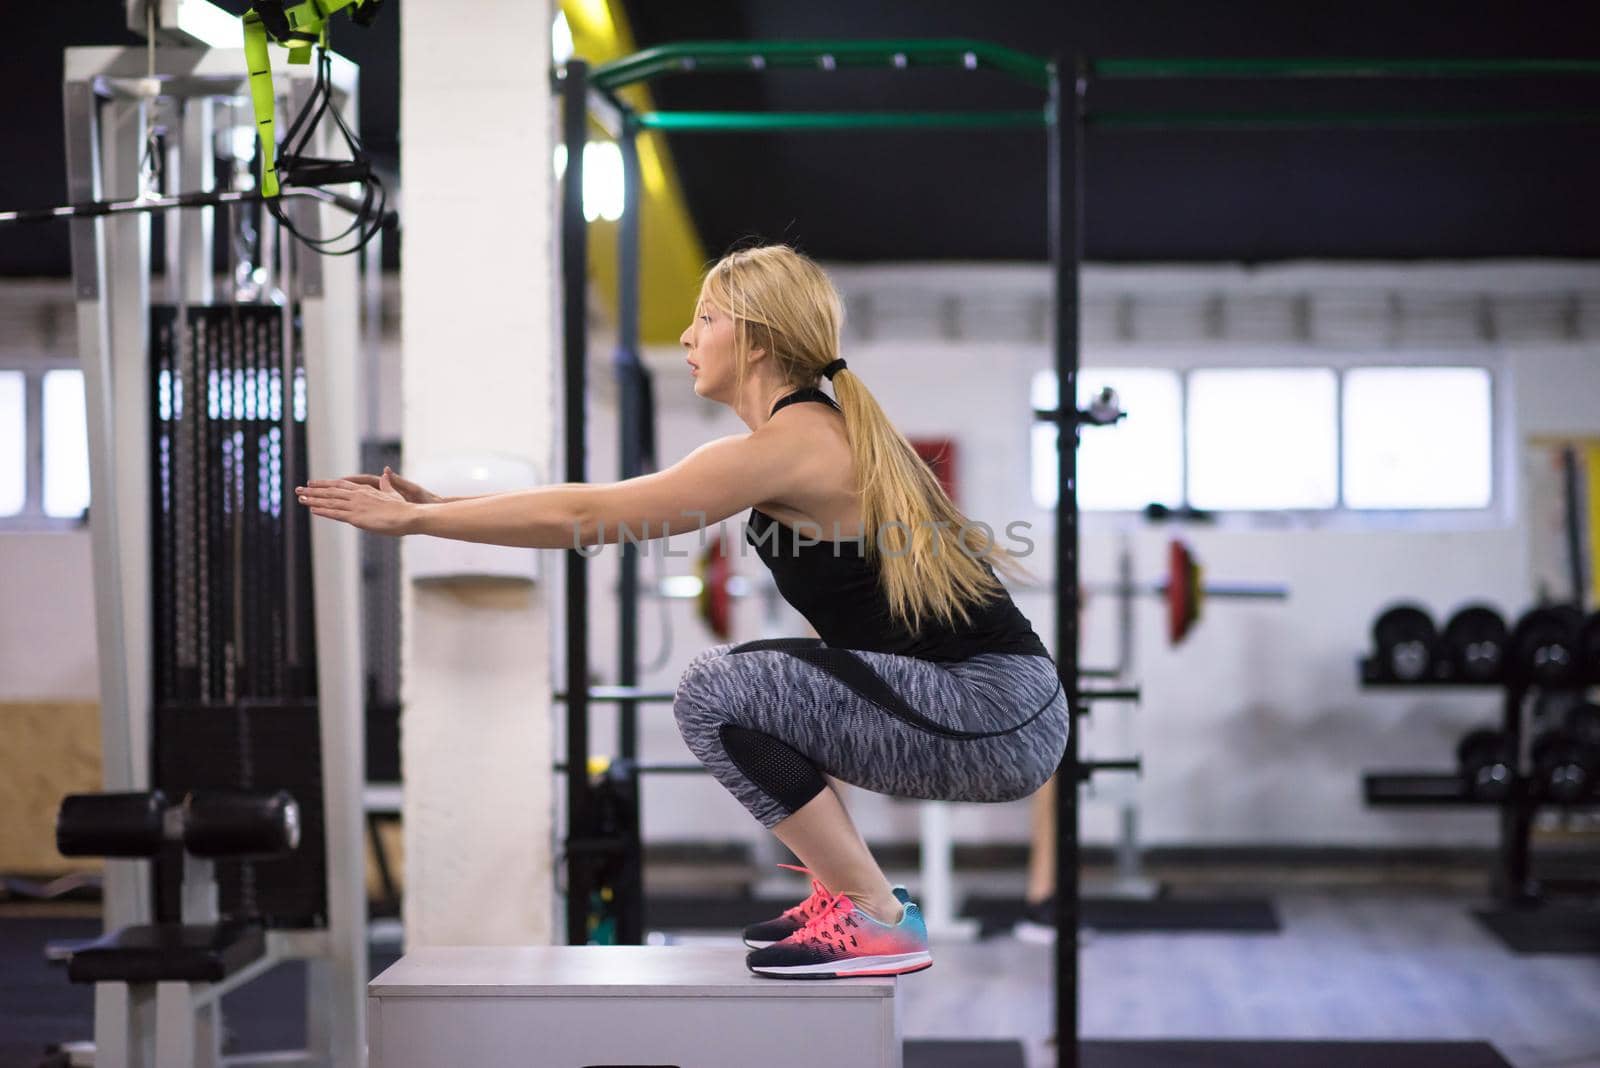 young athletic woman training  jumping on fit box at cross fitness gym